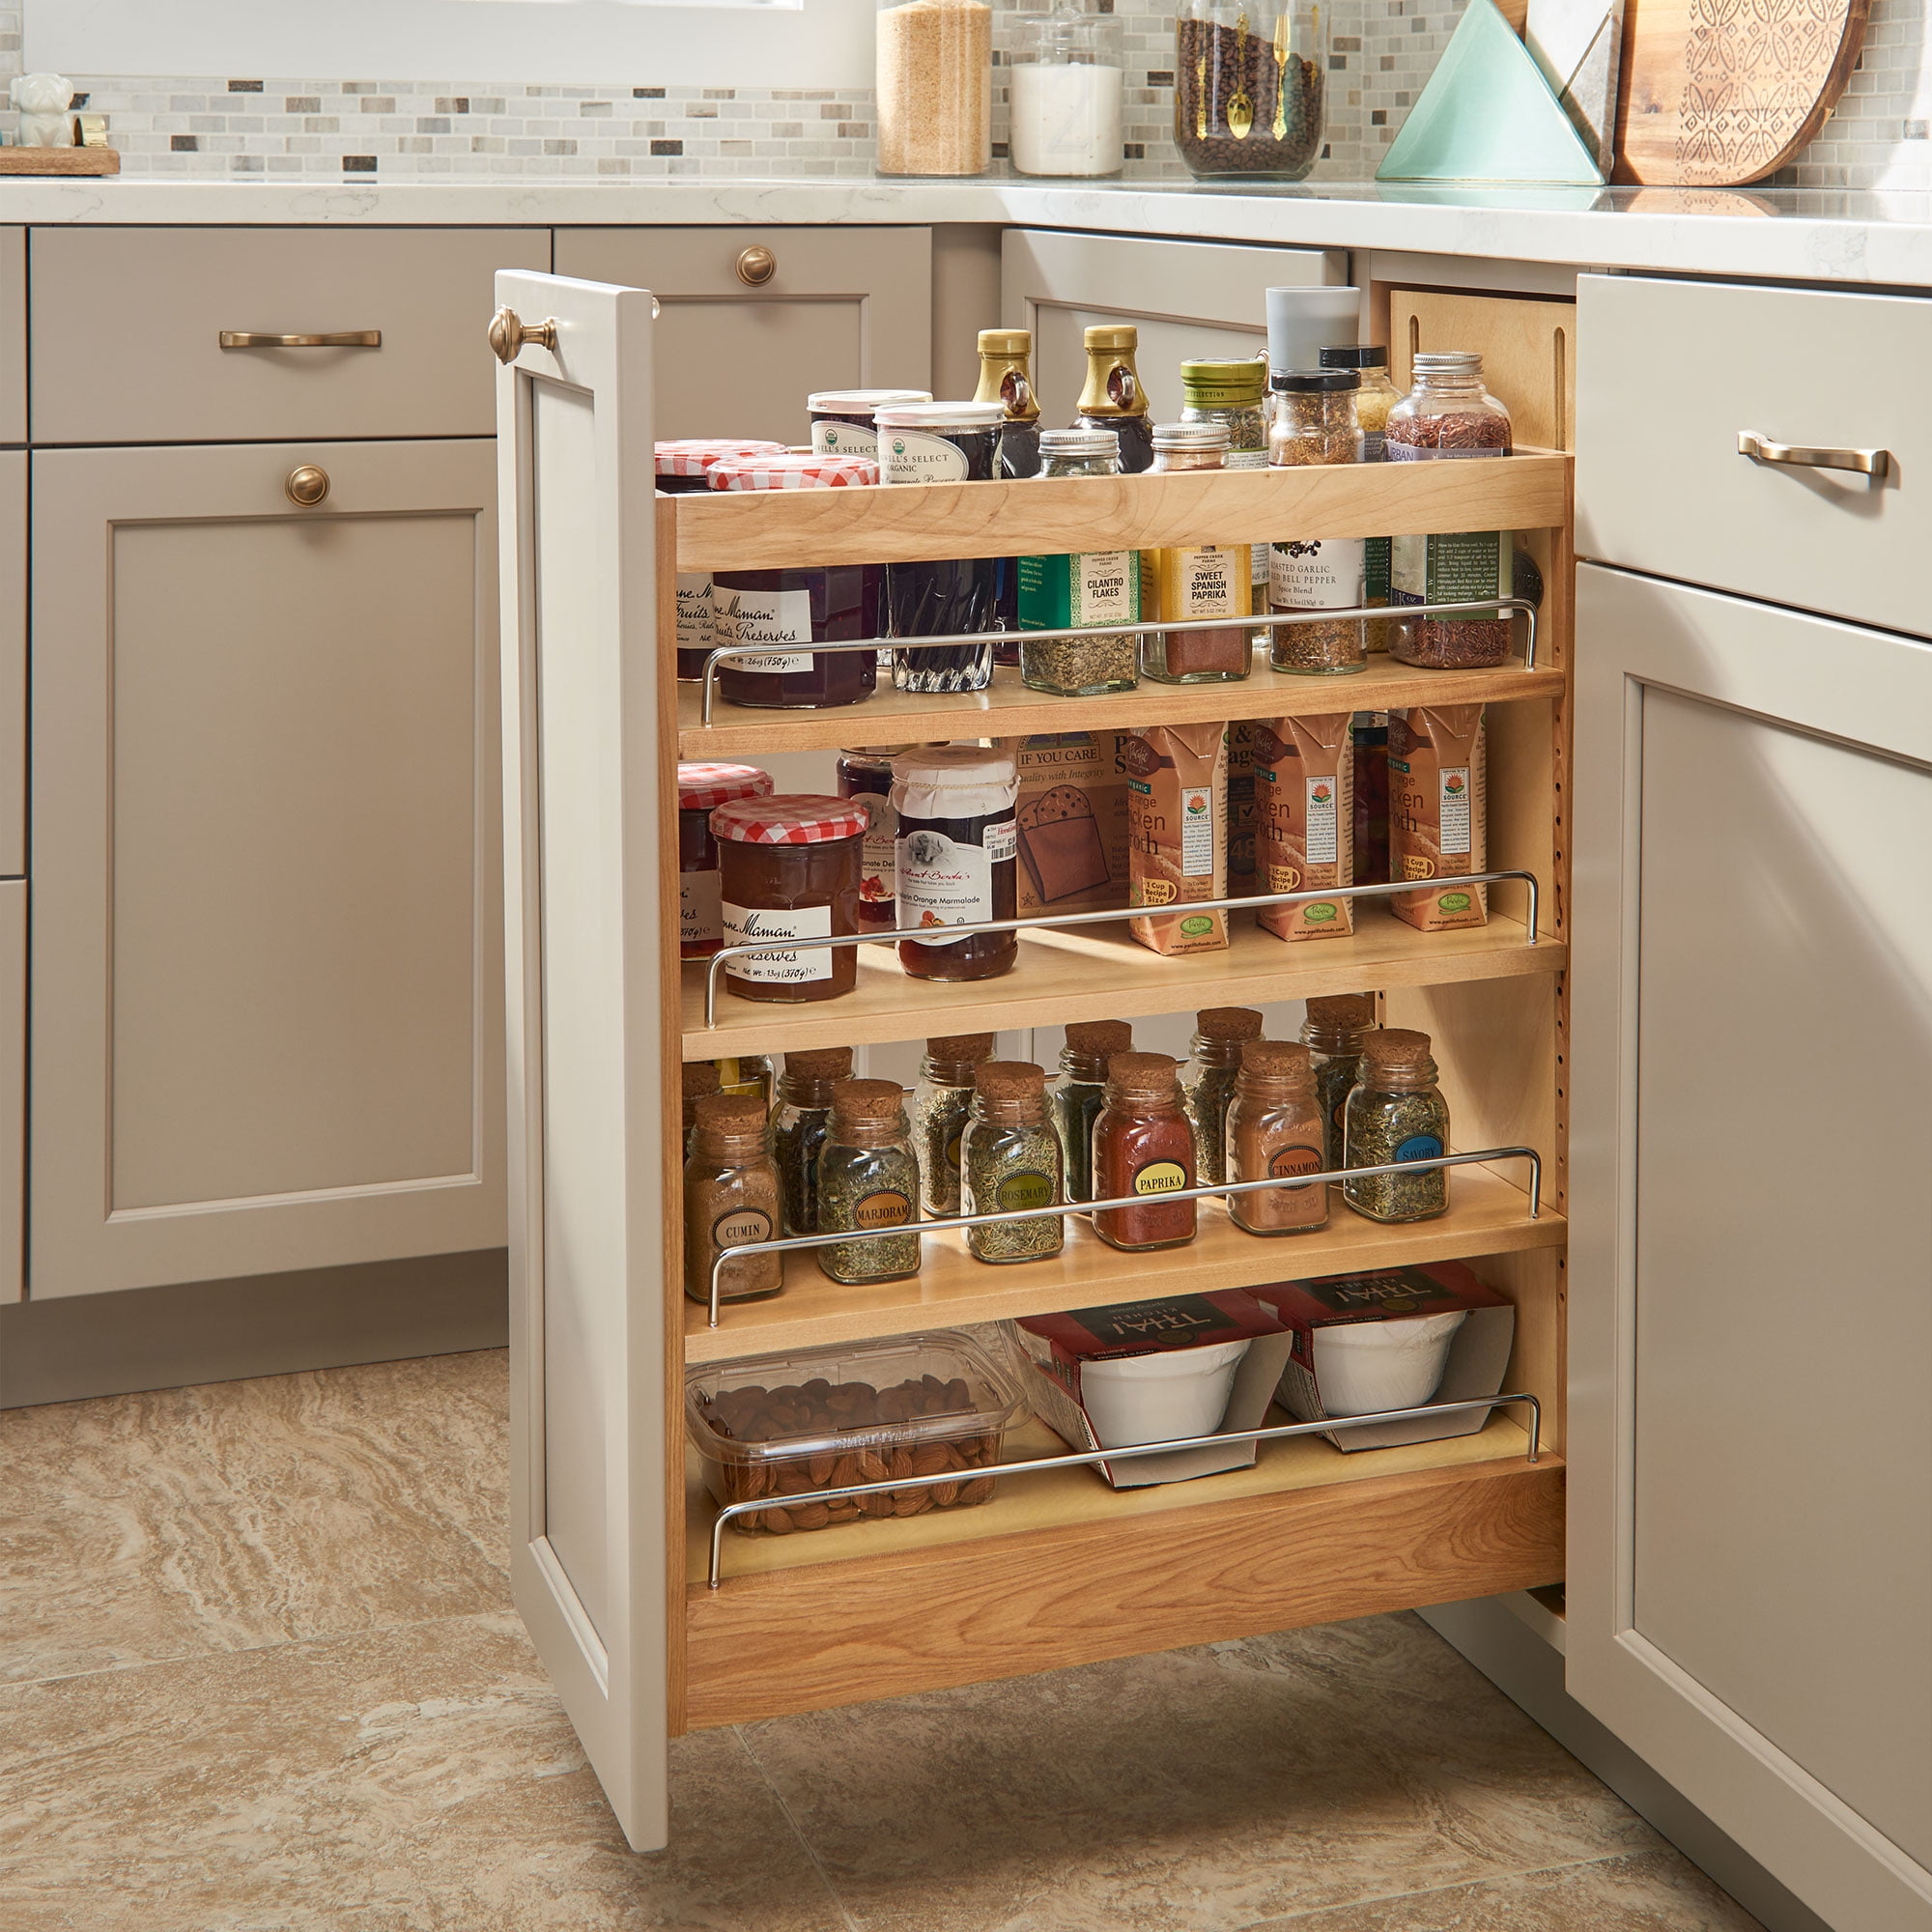 10 New Rev-A-Shelf Storage Solutions for Kitchen Cabinets